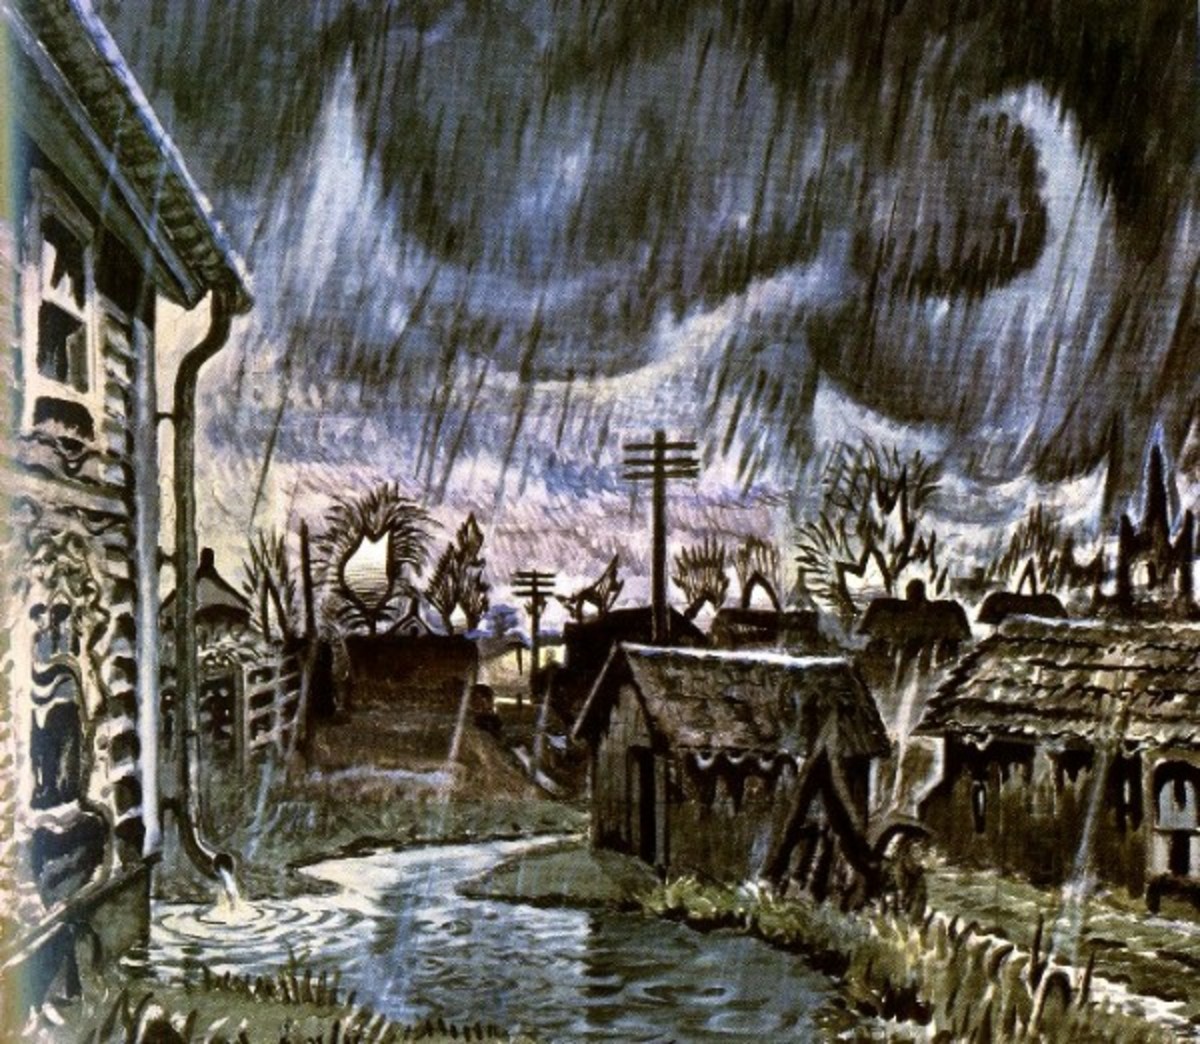 40 x 52 inches. "Night of the Equinox" took Burchfield thirty-eight years to complete, and combines many artistic phases of his career. Drama is created by a limited palette of somber colors, and bold slashes of paint represent a driving rain.